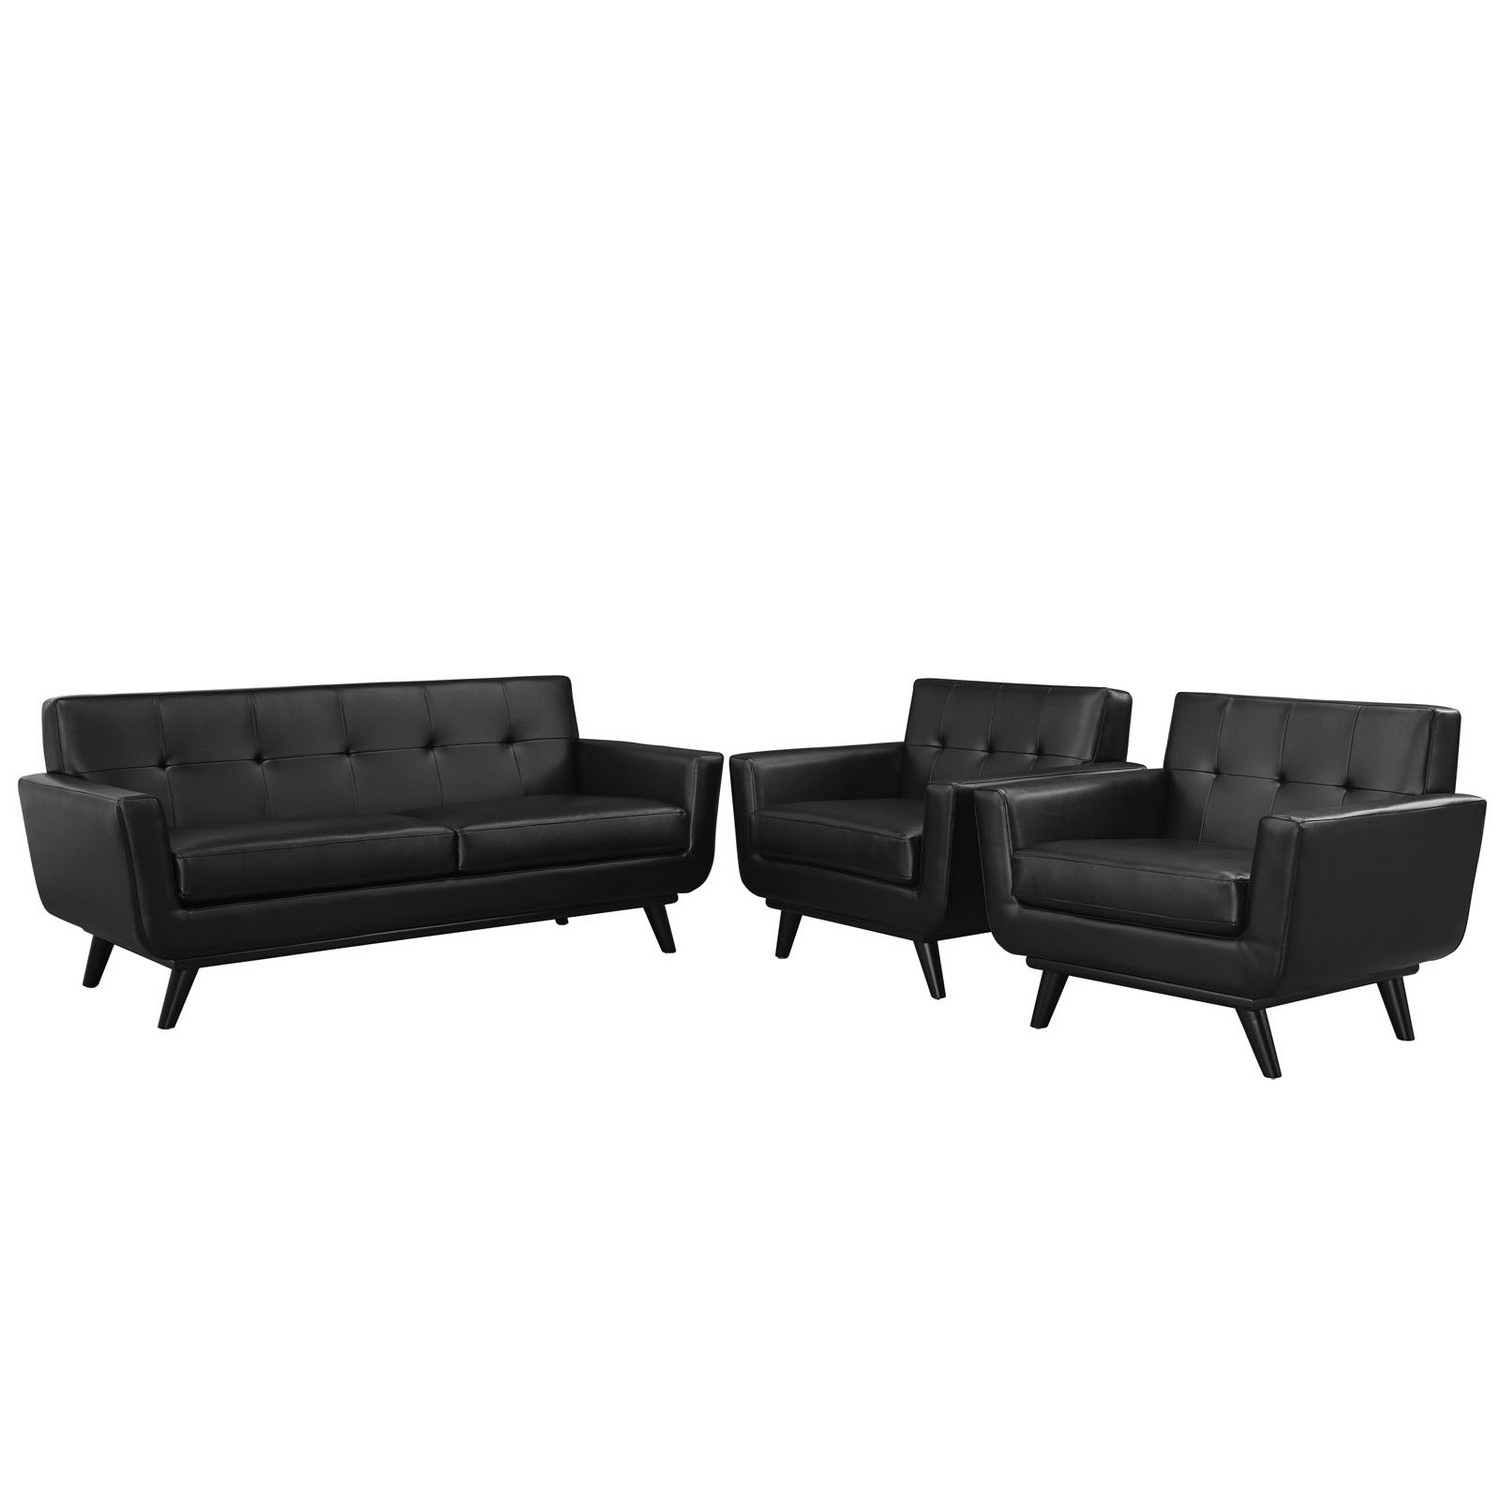 Modway Engage 3 Piece Leather Living Room Set - Black